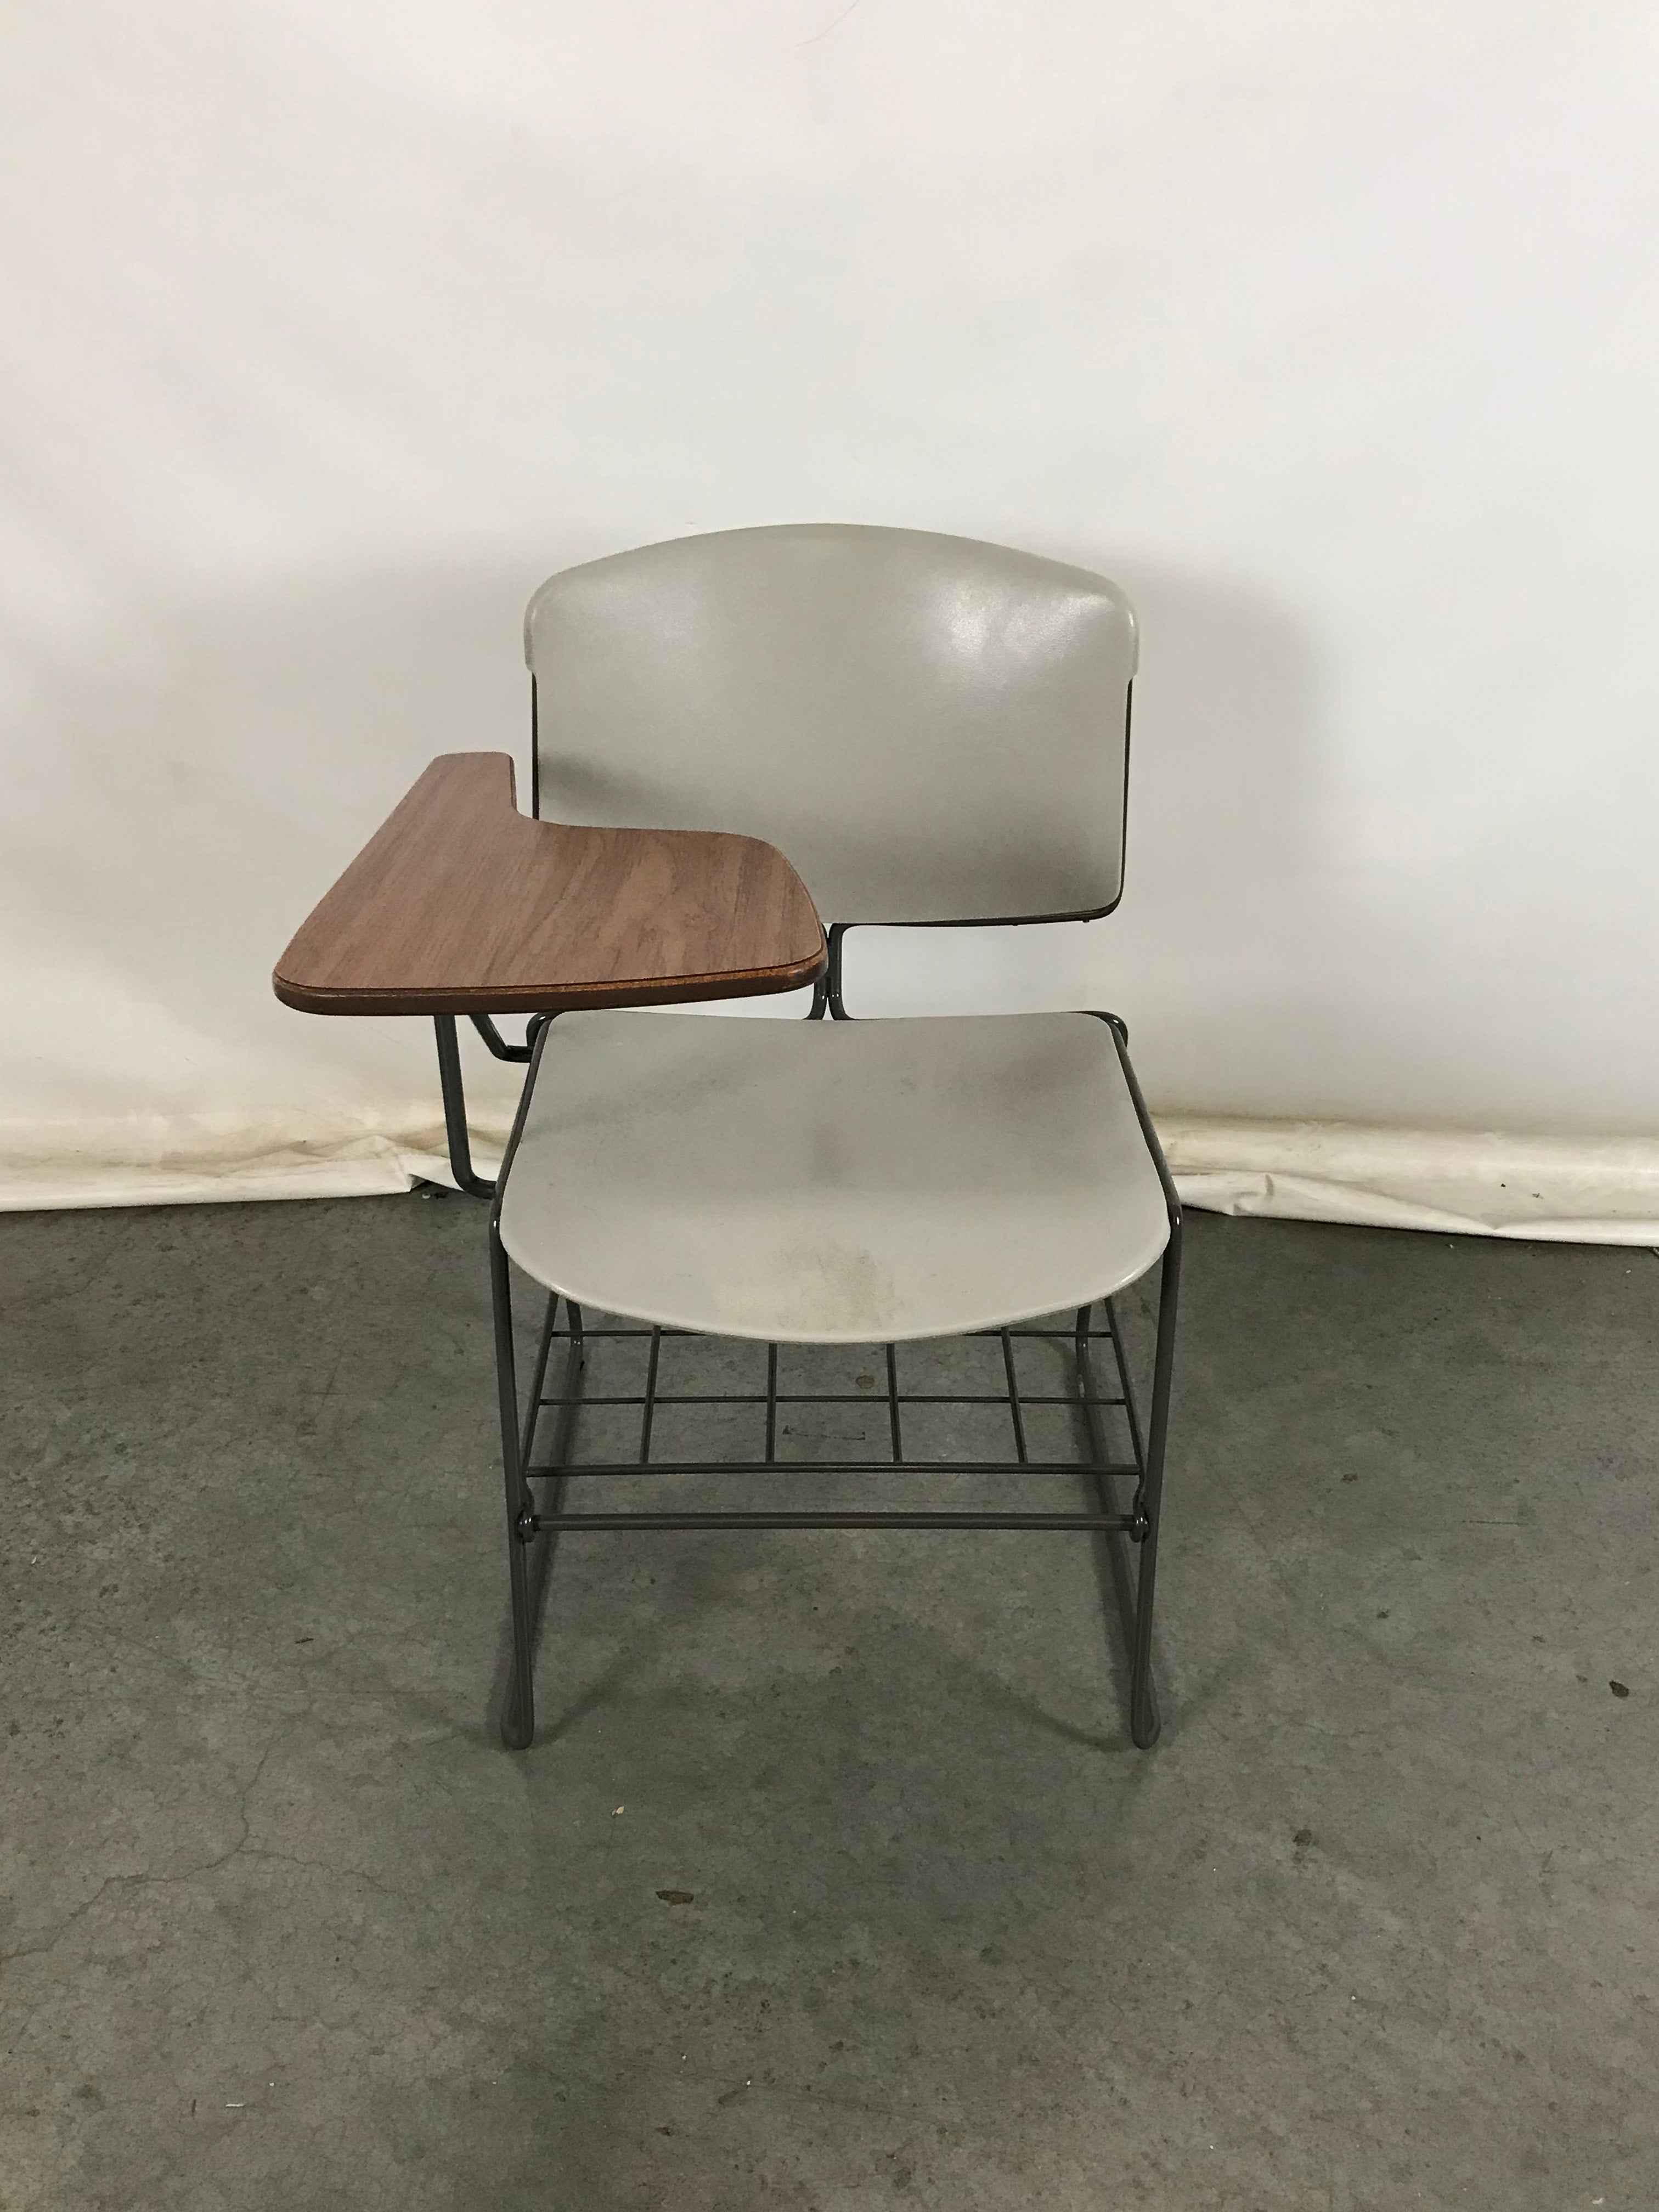 Steelcase Right-Handed Student Desk Chair